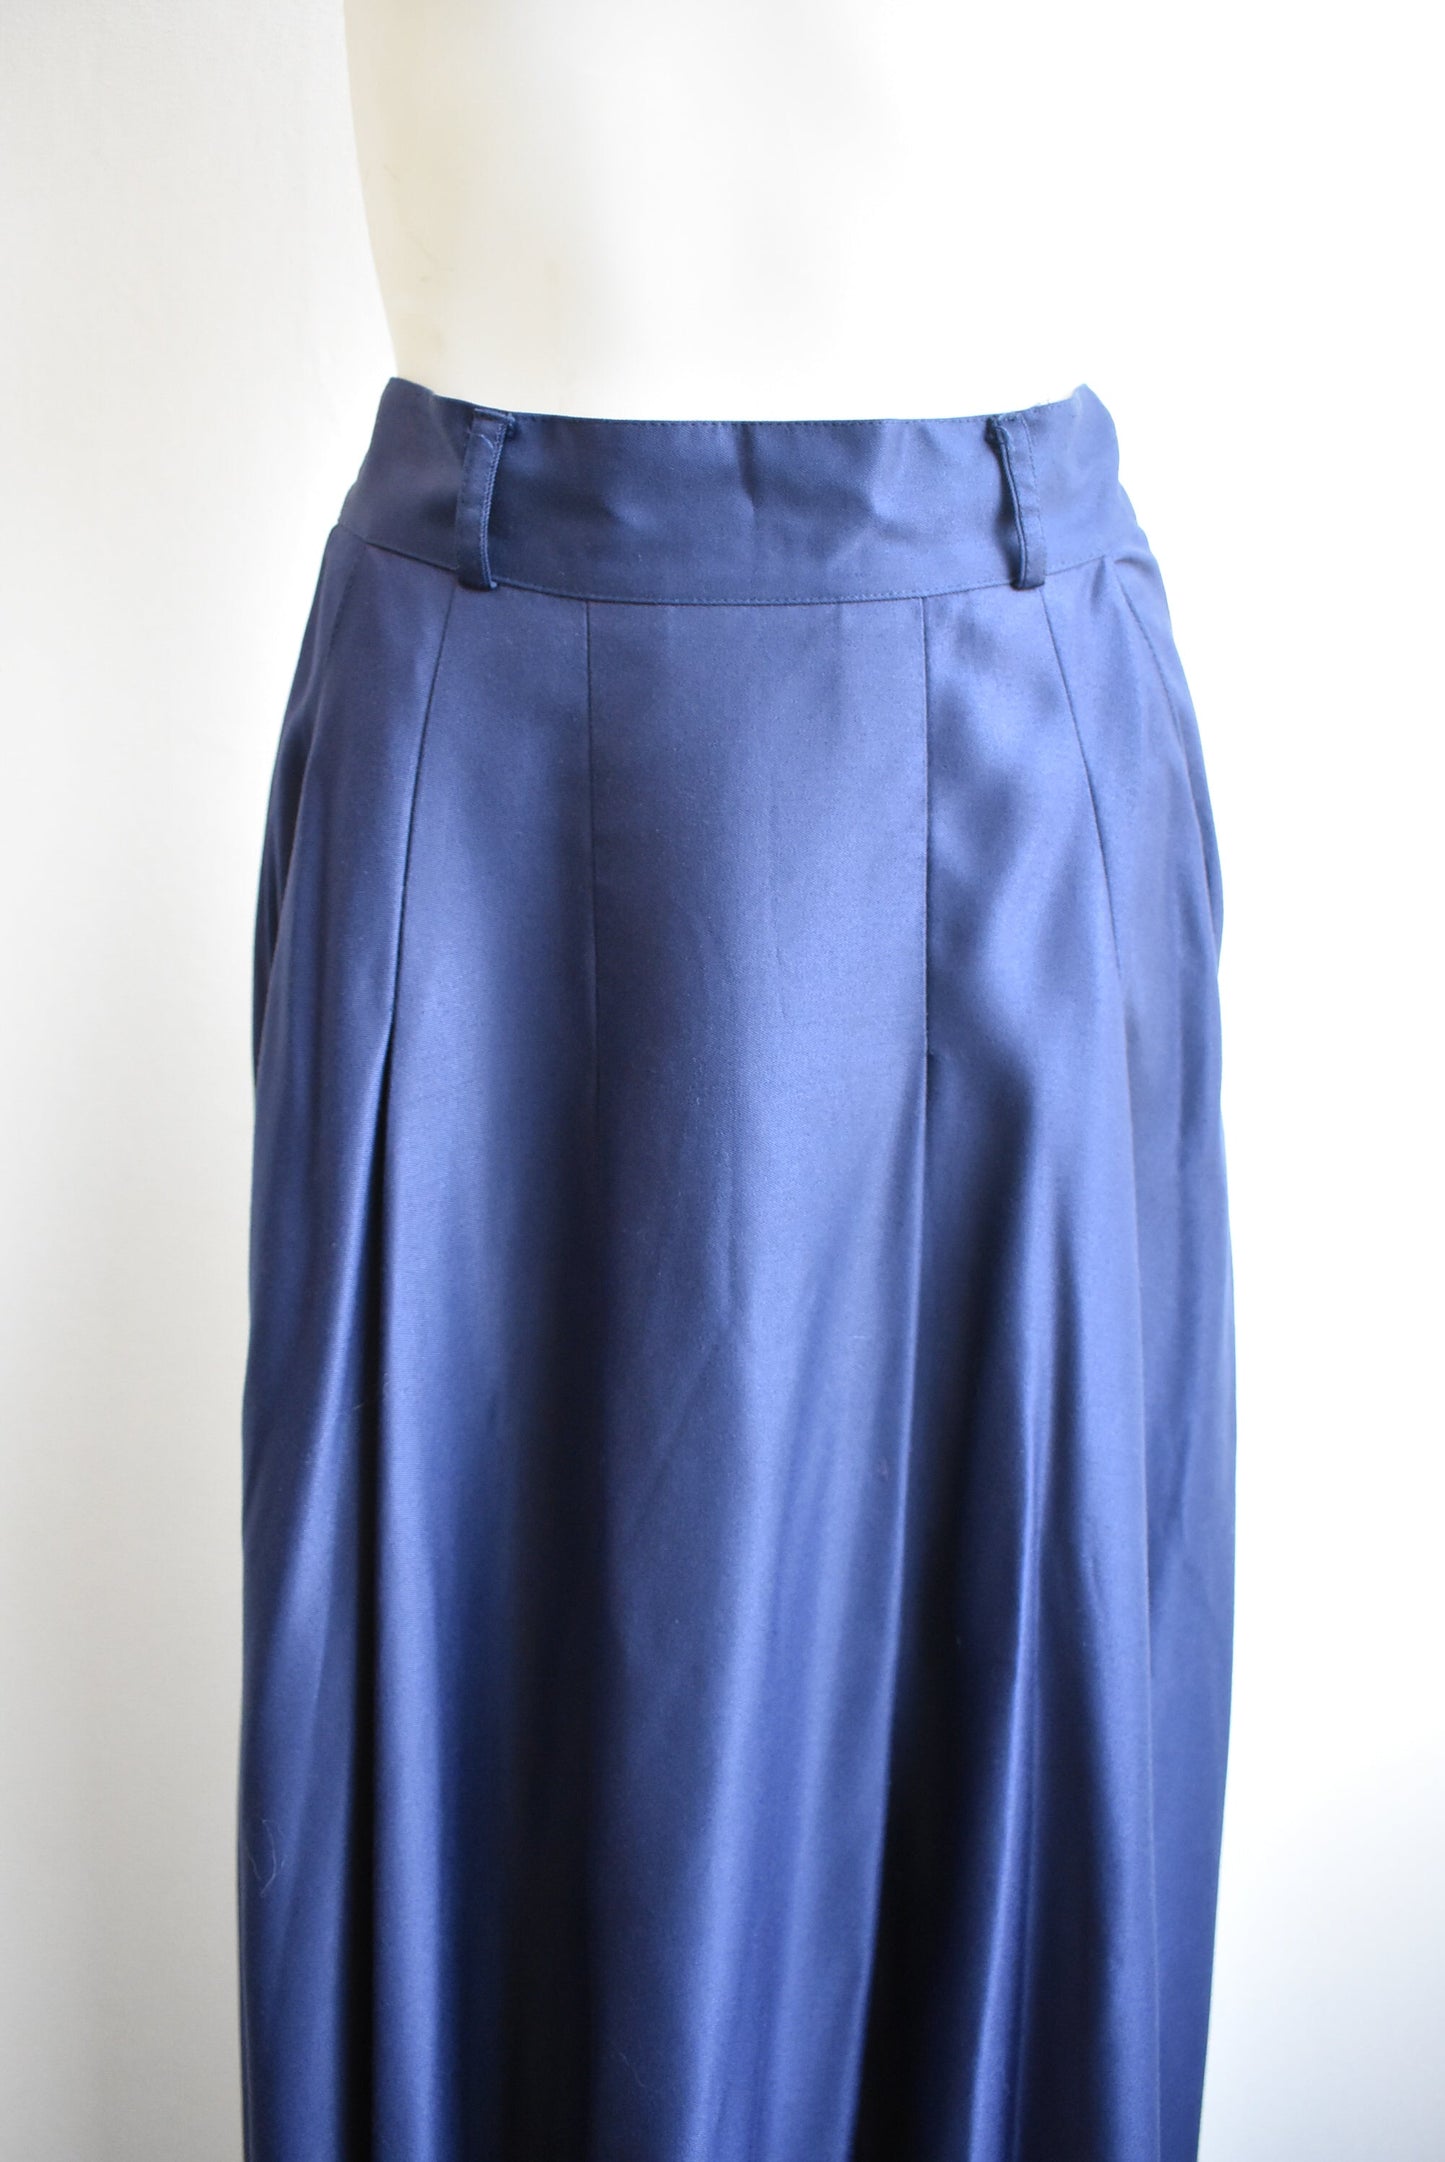 Vintage Barbara Lee pleated skirt with pockets, made in NZ. 10